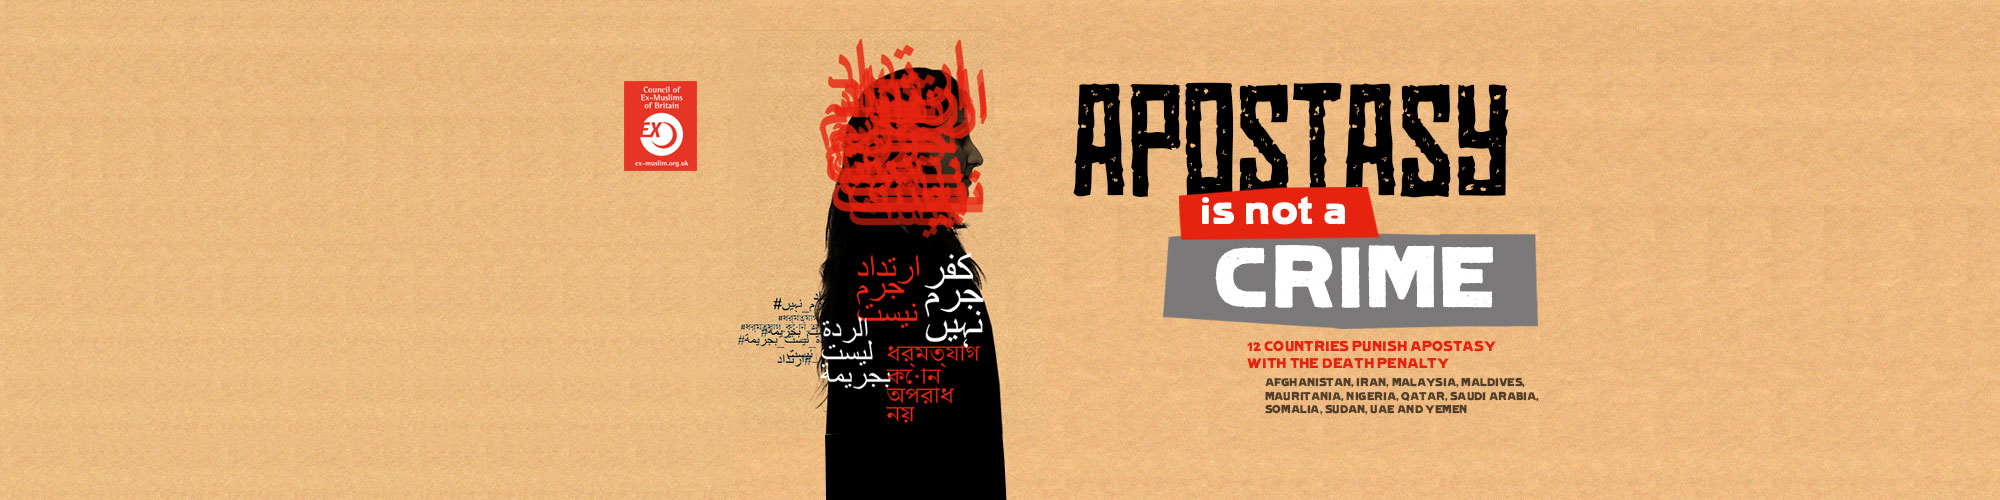 Apostasy is not a crime graphic